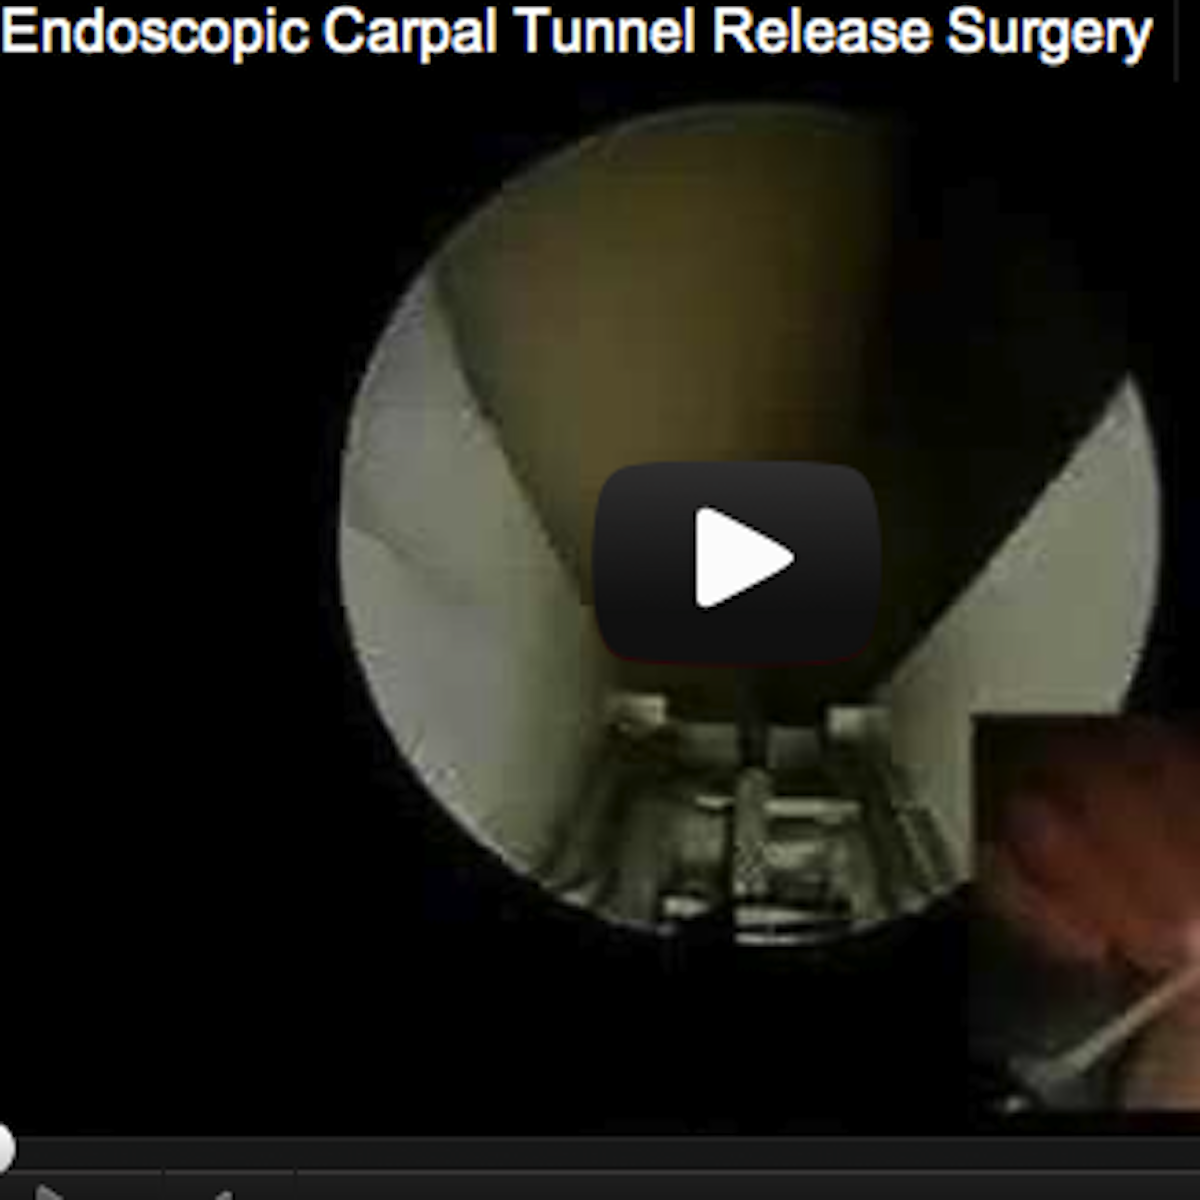 Endoscopic Carpal Tunnel Surgery Dr. Wint narrates